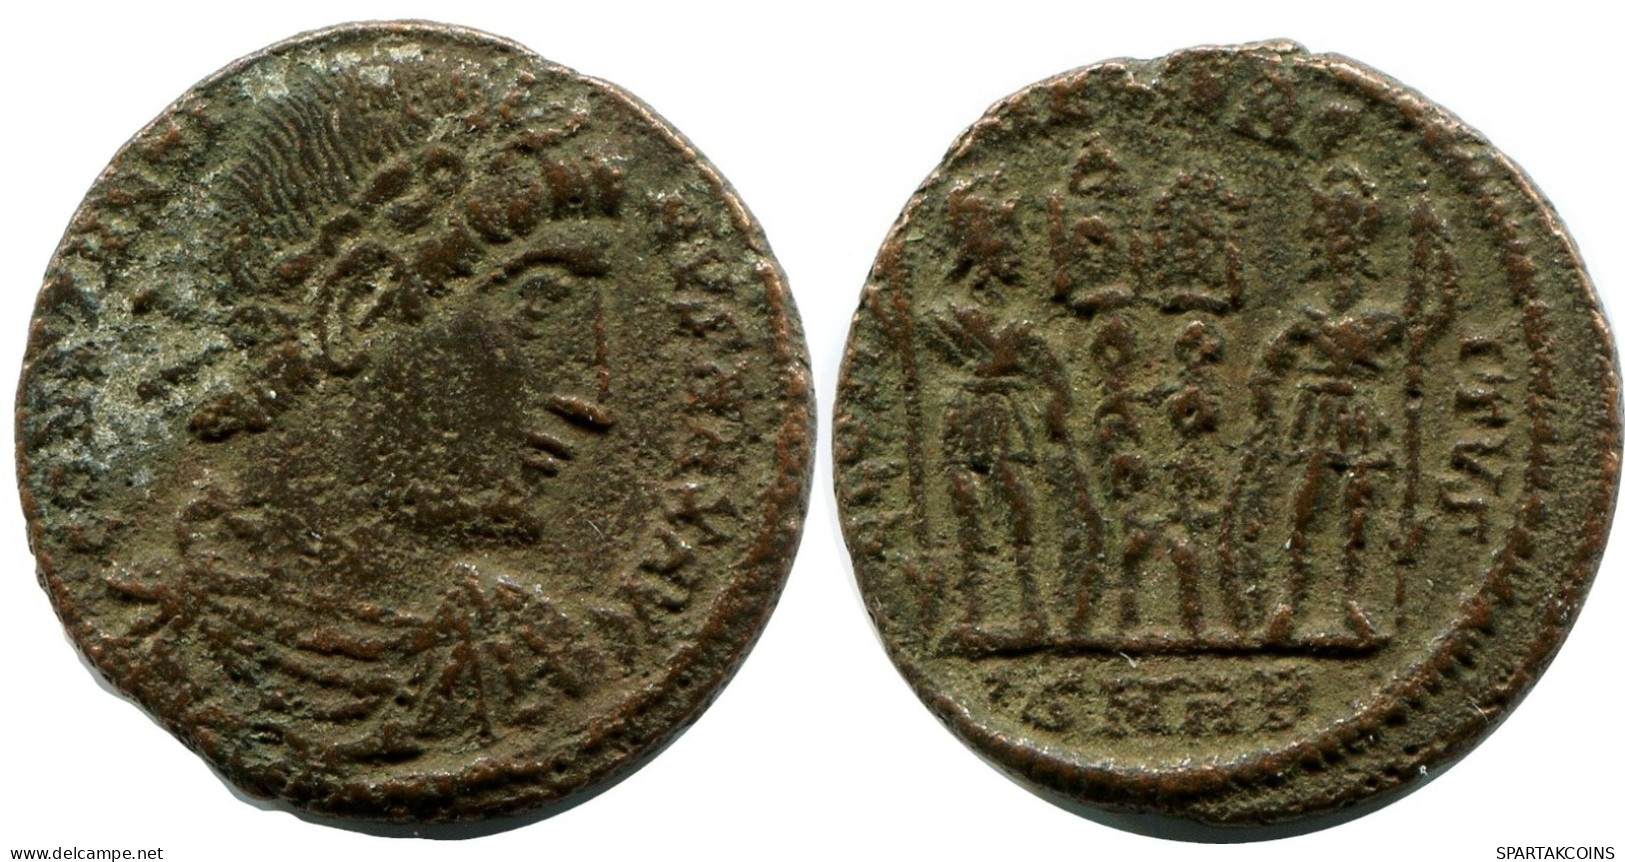 CONSTANTINE I MINTED IN HERACLEA FROM THE ROYAL ONTARIO MUSEUM #ANC11200.14.E.A - The Christian Empire (307 AD To 363 AD)